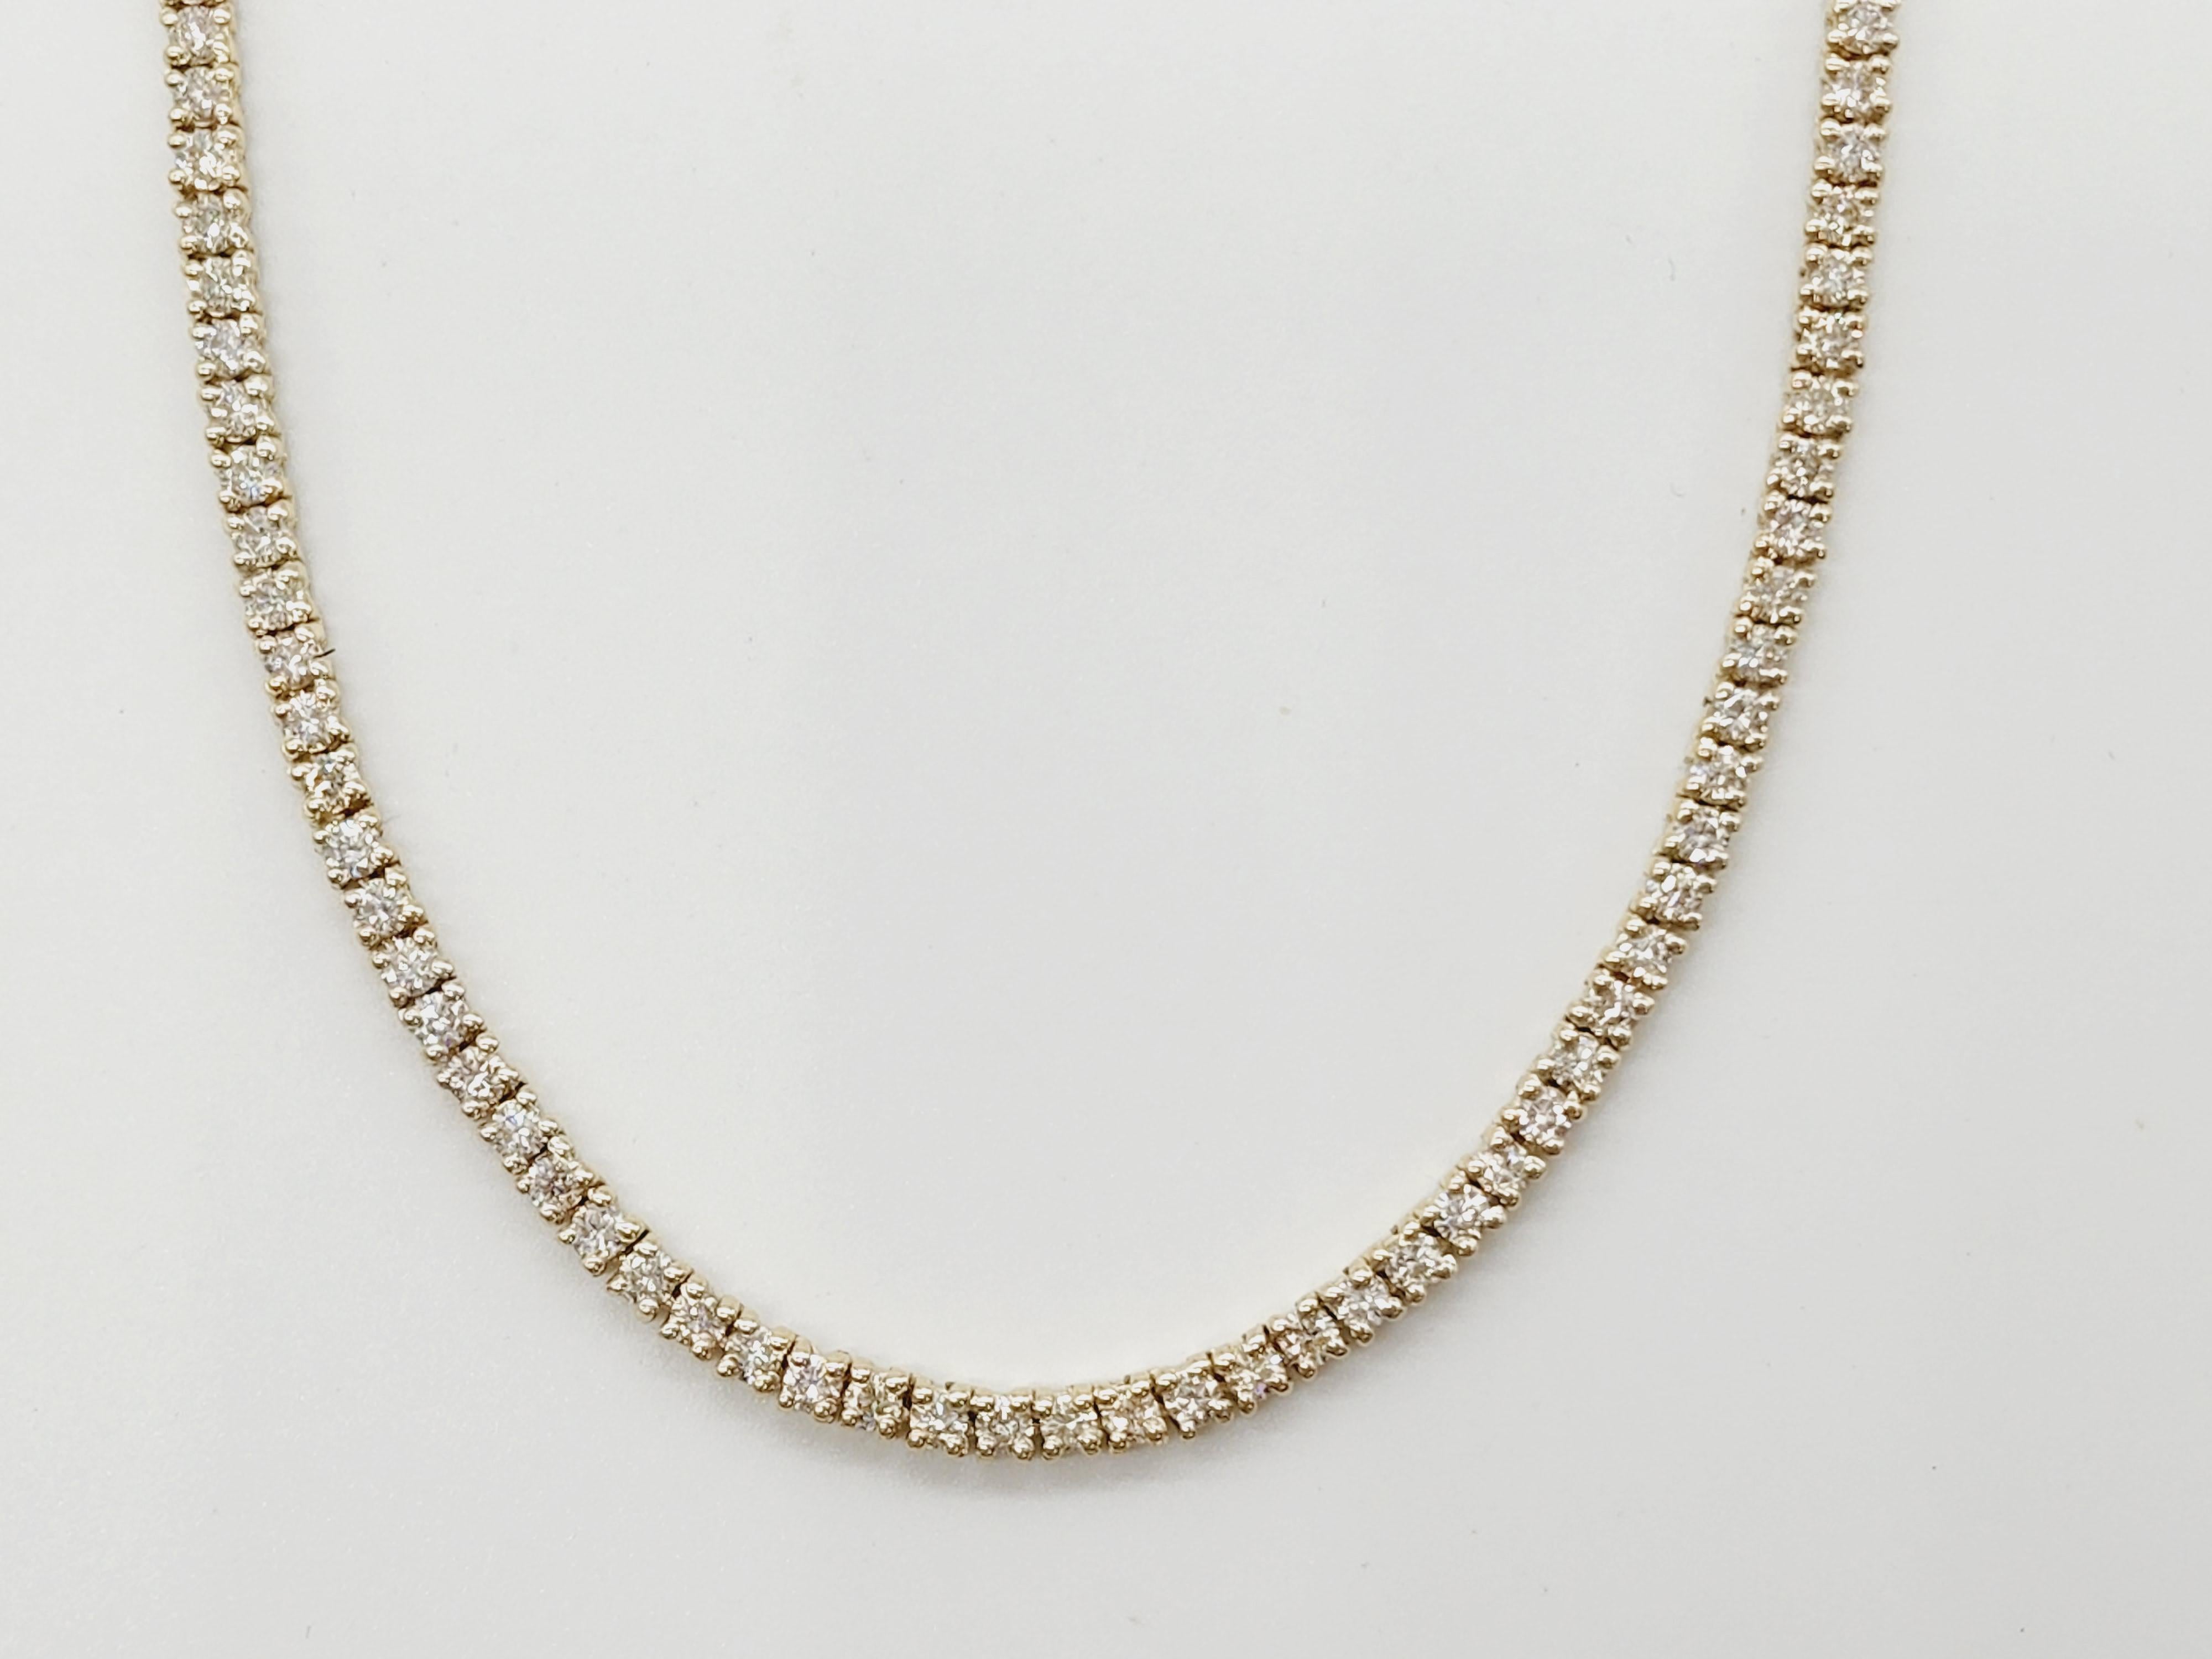 Brilliant and beautiful tennis necklace, natural round-brilliant cut white diamonds clean and Excellent shine. 
14k yellow gold classic four-prong style for maximum light brilliance. 
20 inch length. Average H Color, VS Clarity. 